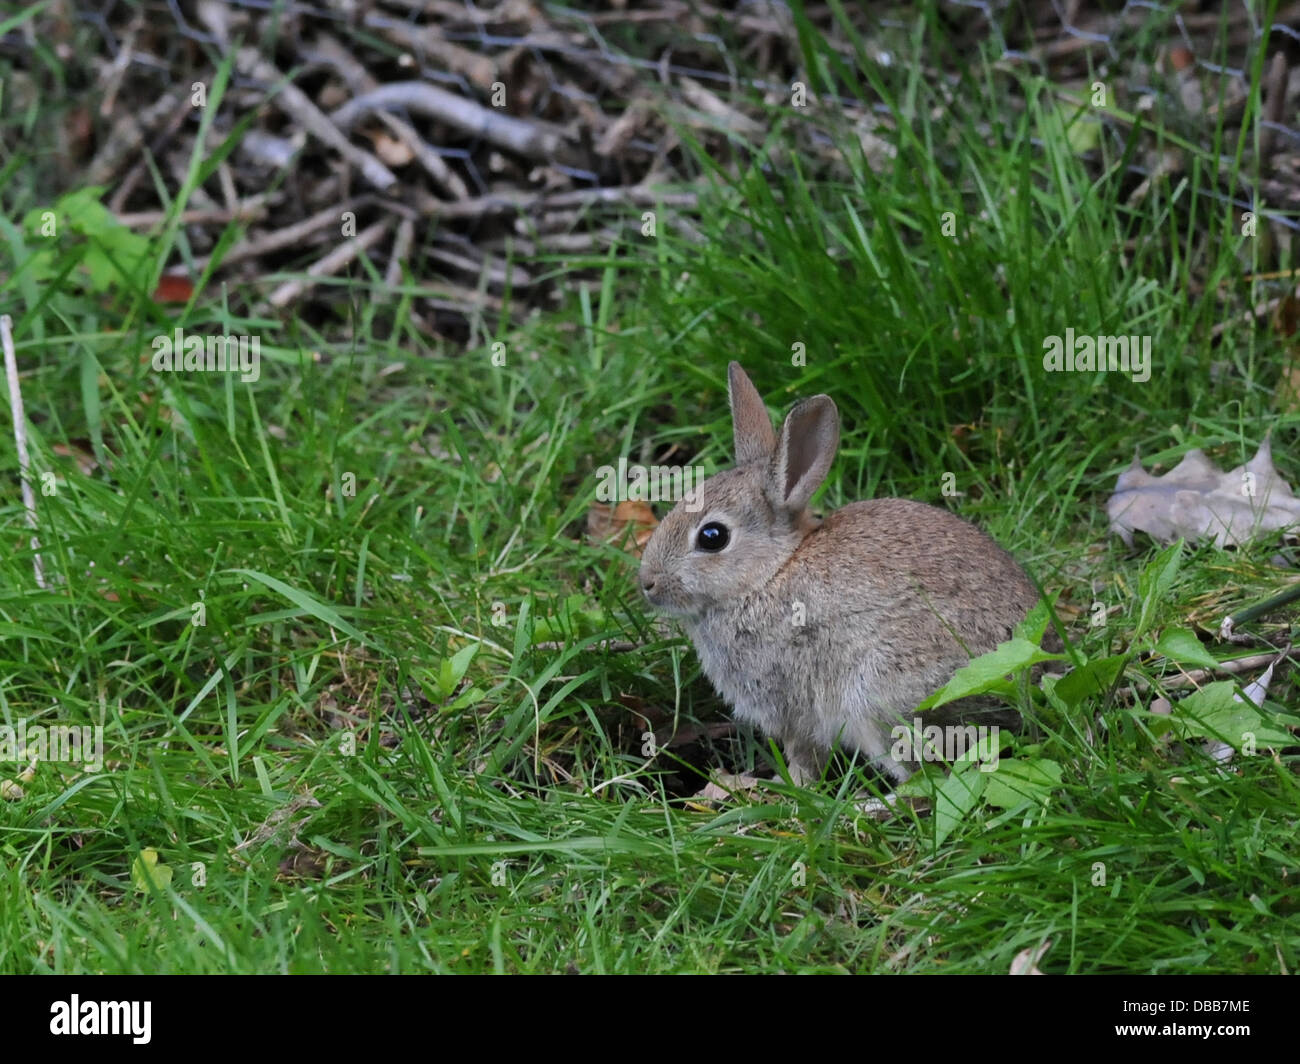 A tiny little baby rabbit in the grass. Stock Photo